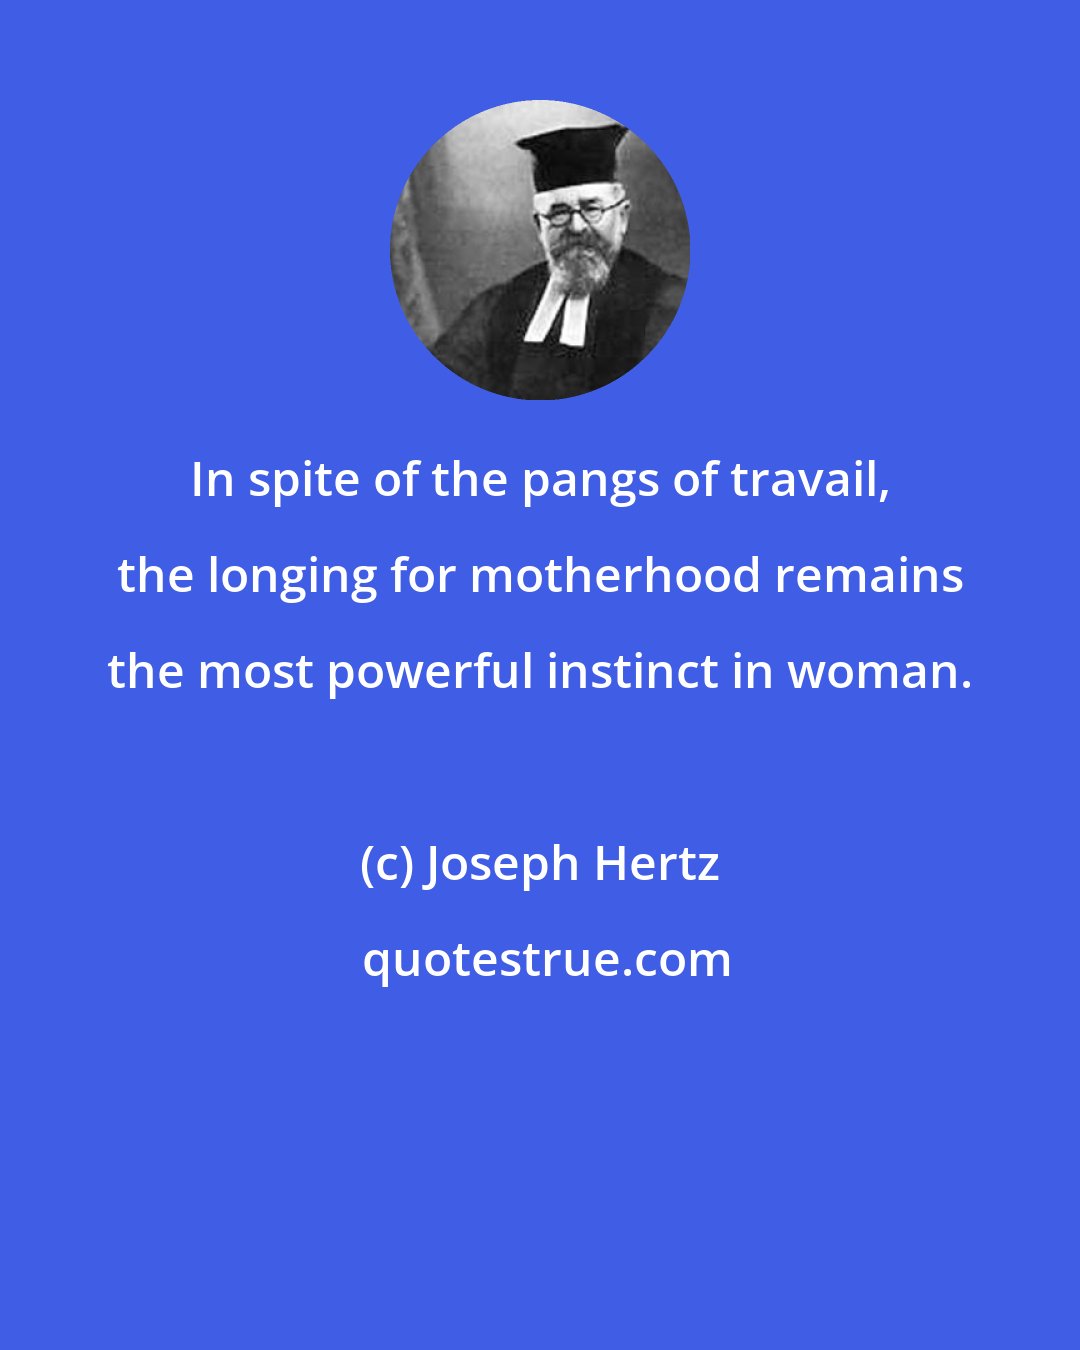 Joseph Hertz: In spite of the pangs of travail, the longing for motherhood remains the most powerful instinct in woman.